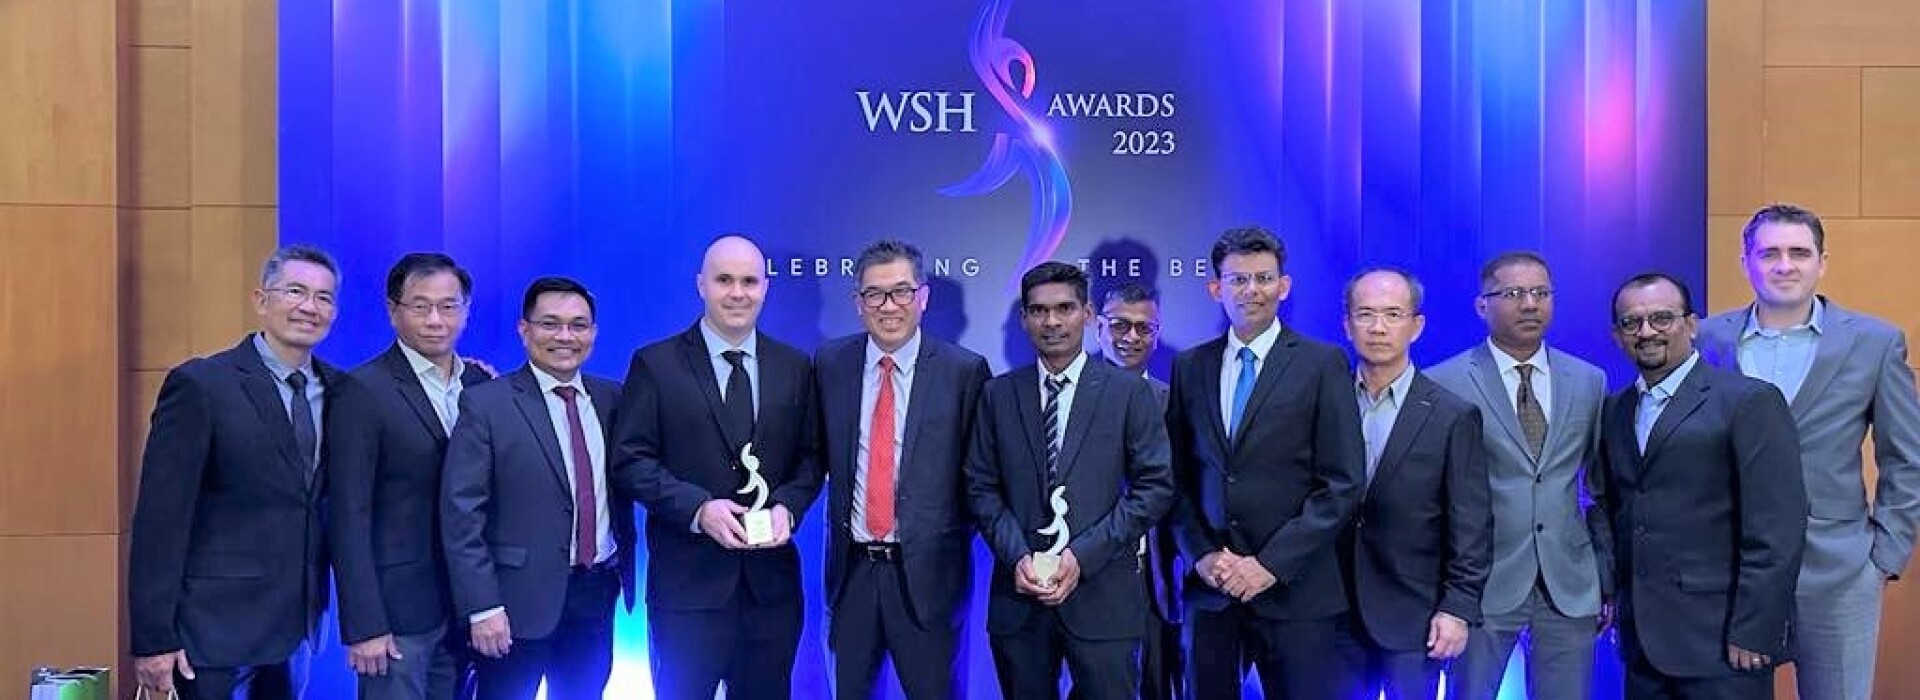 McConnell Dowell Southeast Asia secure awards